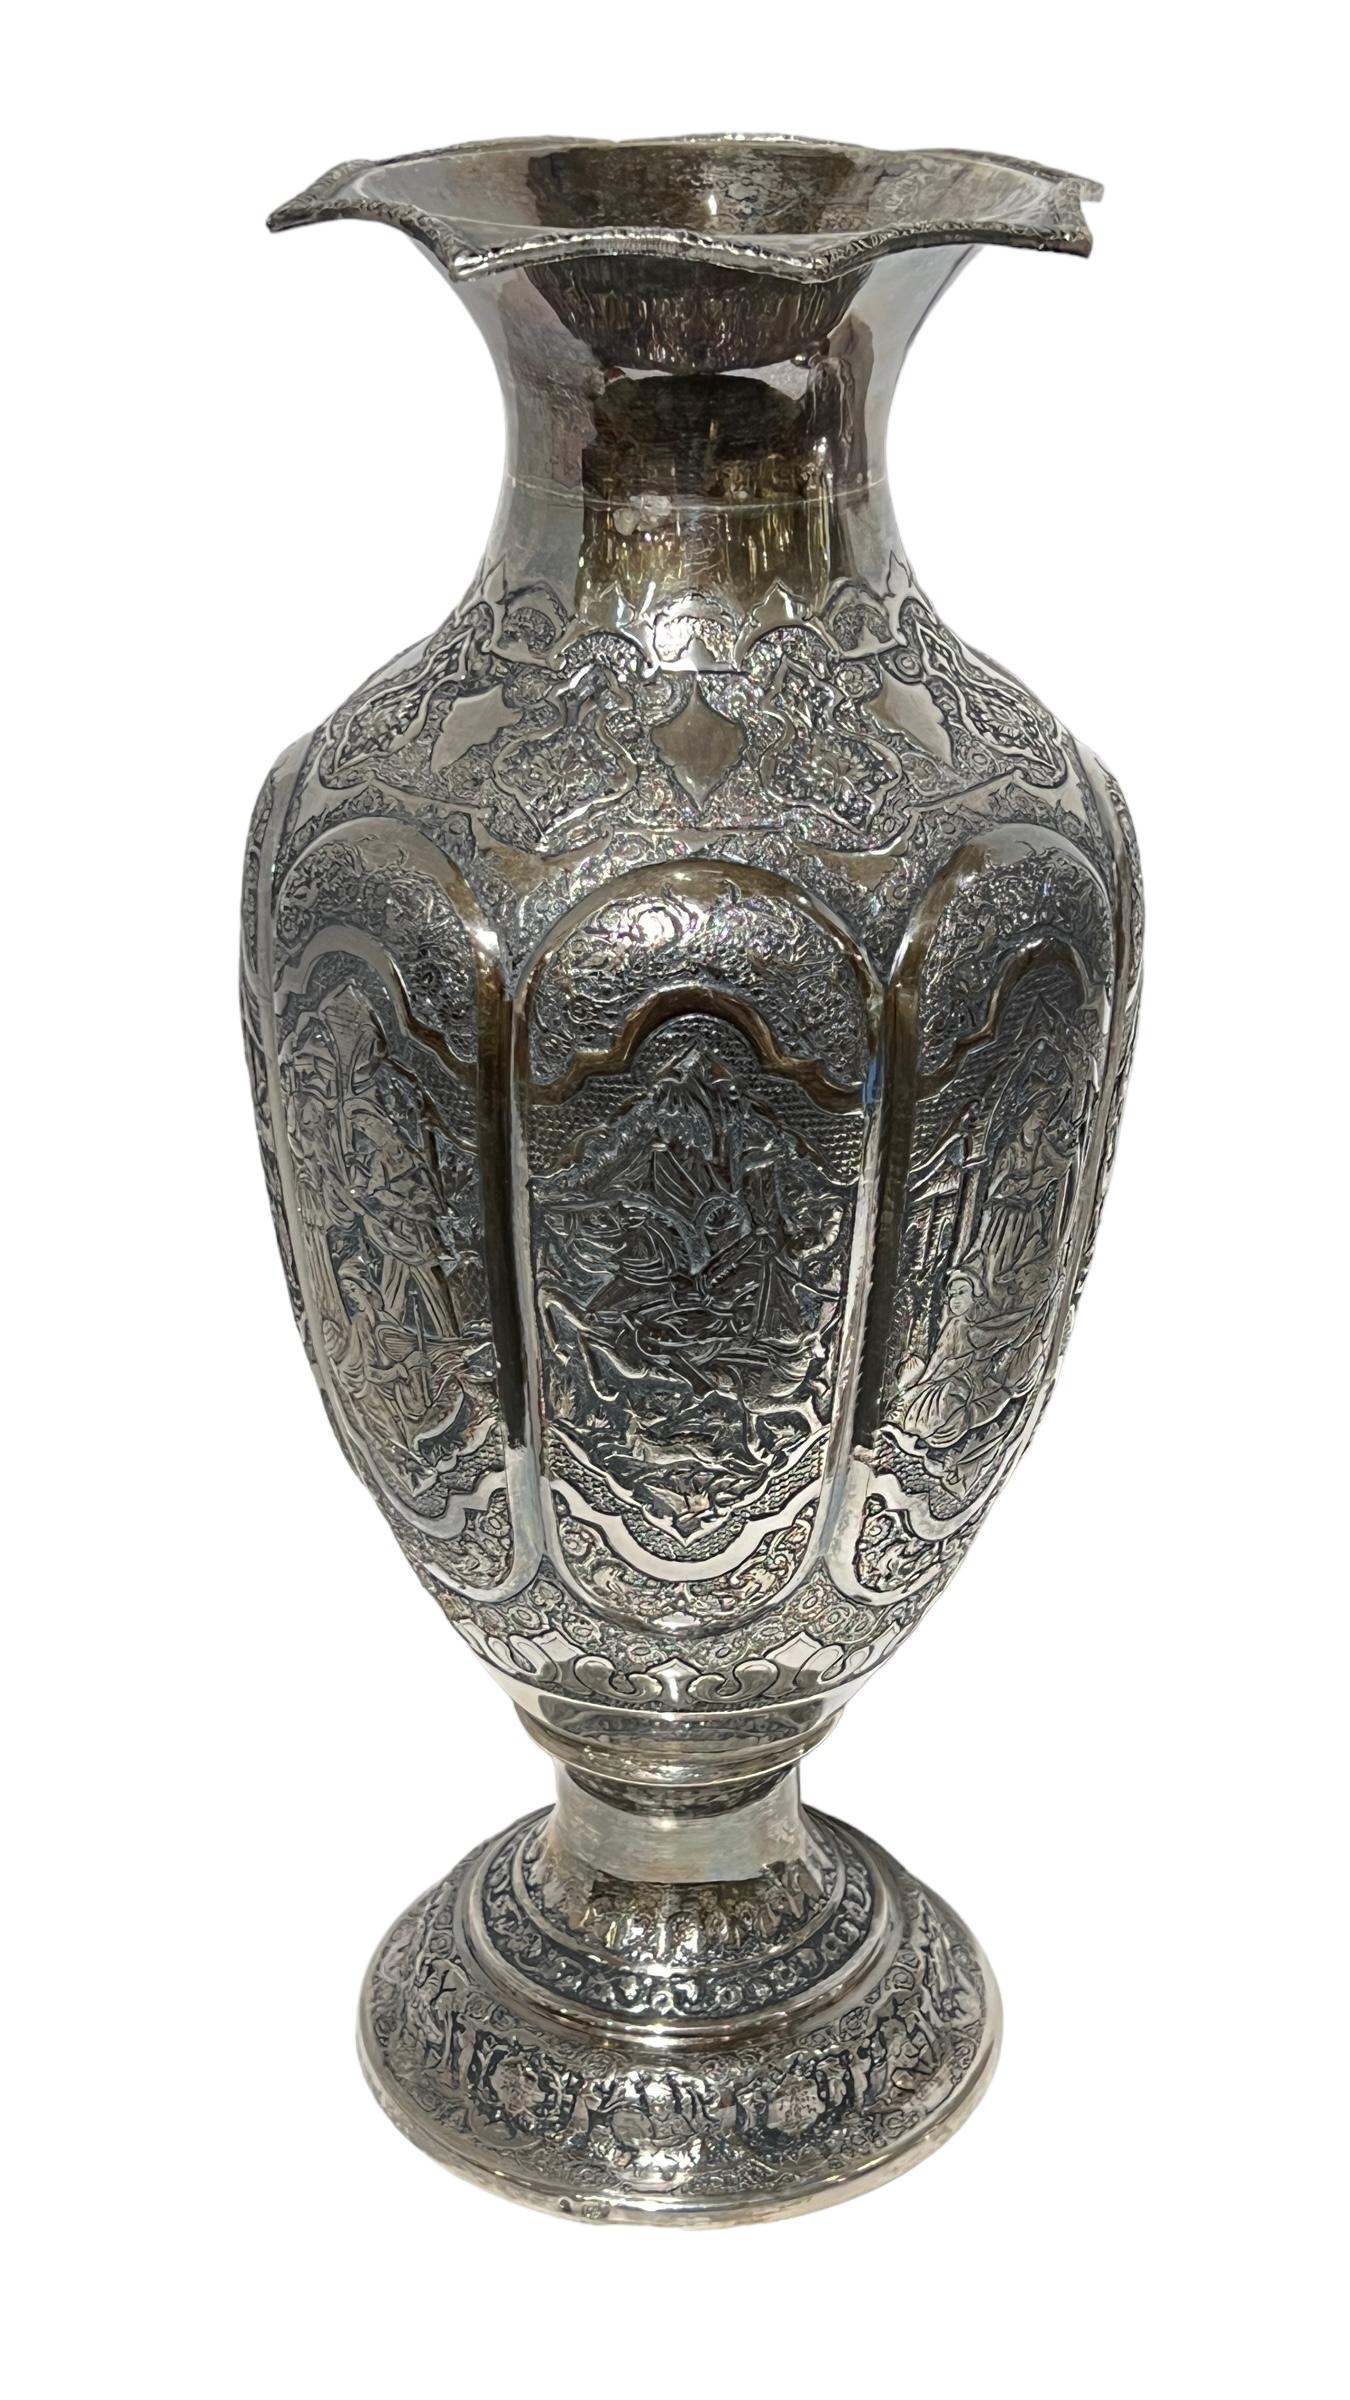  pair of Persian silver vases with extensive chased and repousse designs including bulbous cartouches depicting men hunting on horseback and women preparing a bountiful meal.  Each 19 inches tall and 7 3/4 inches across.  Weights:  2,350 g, 82.89